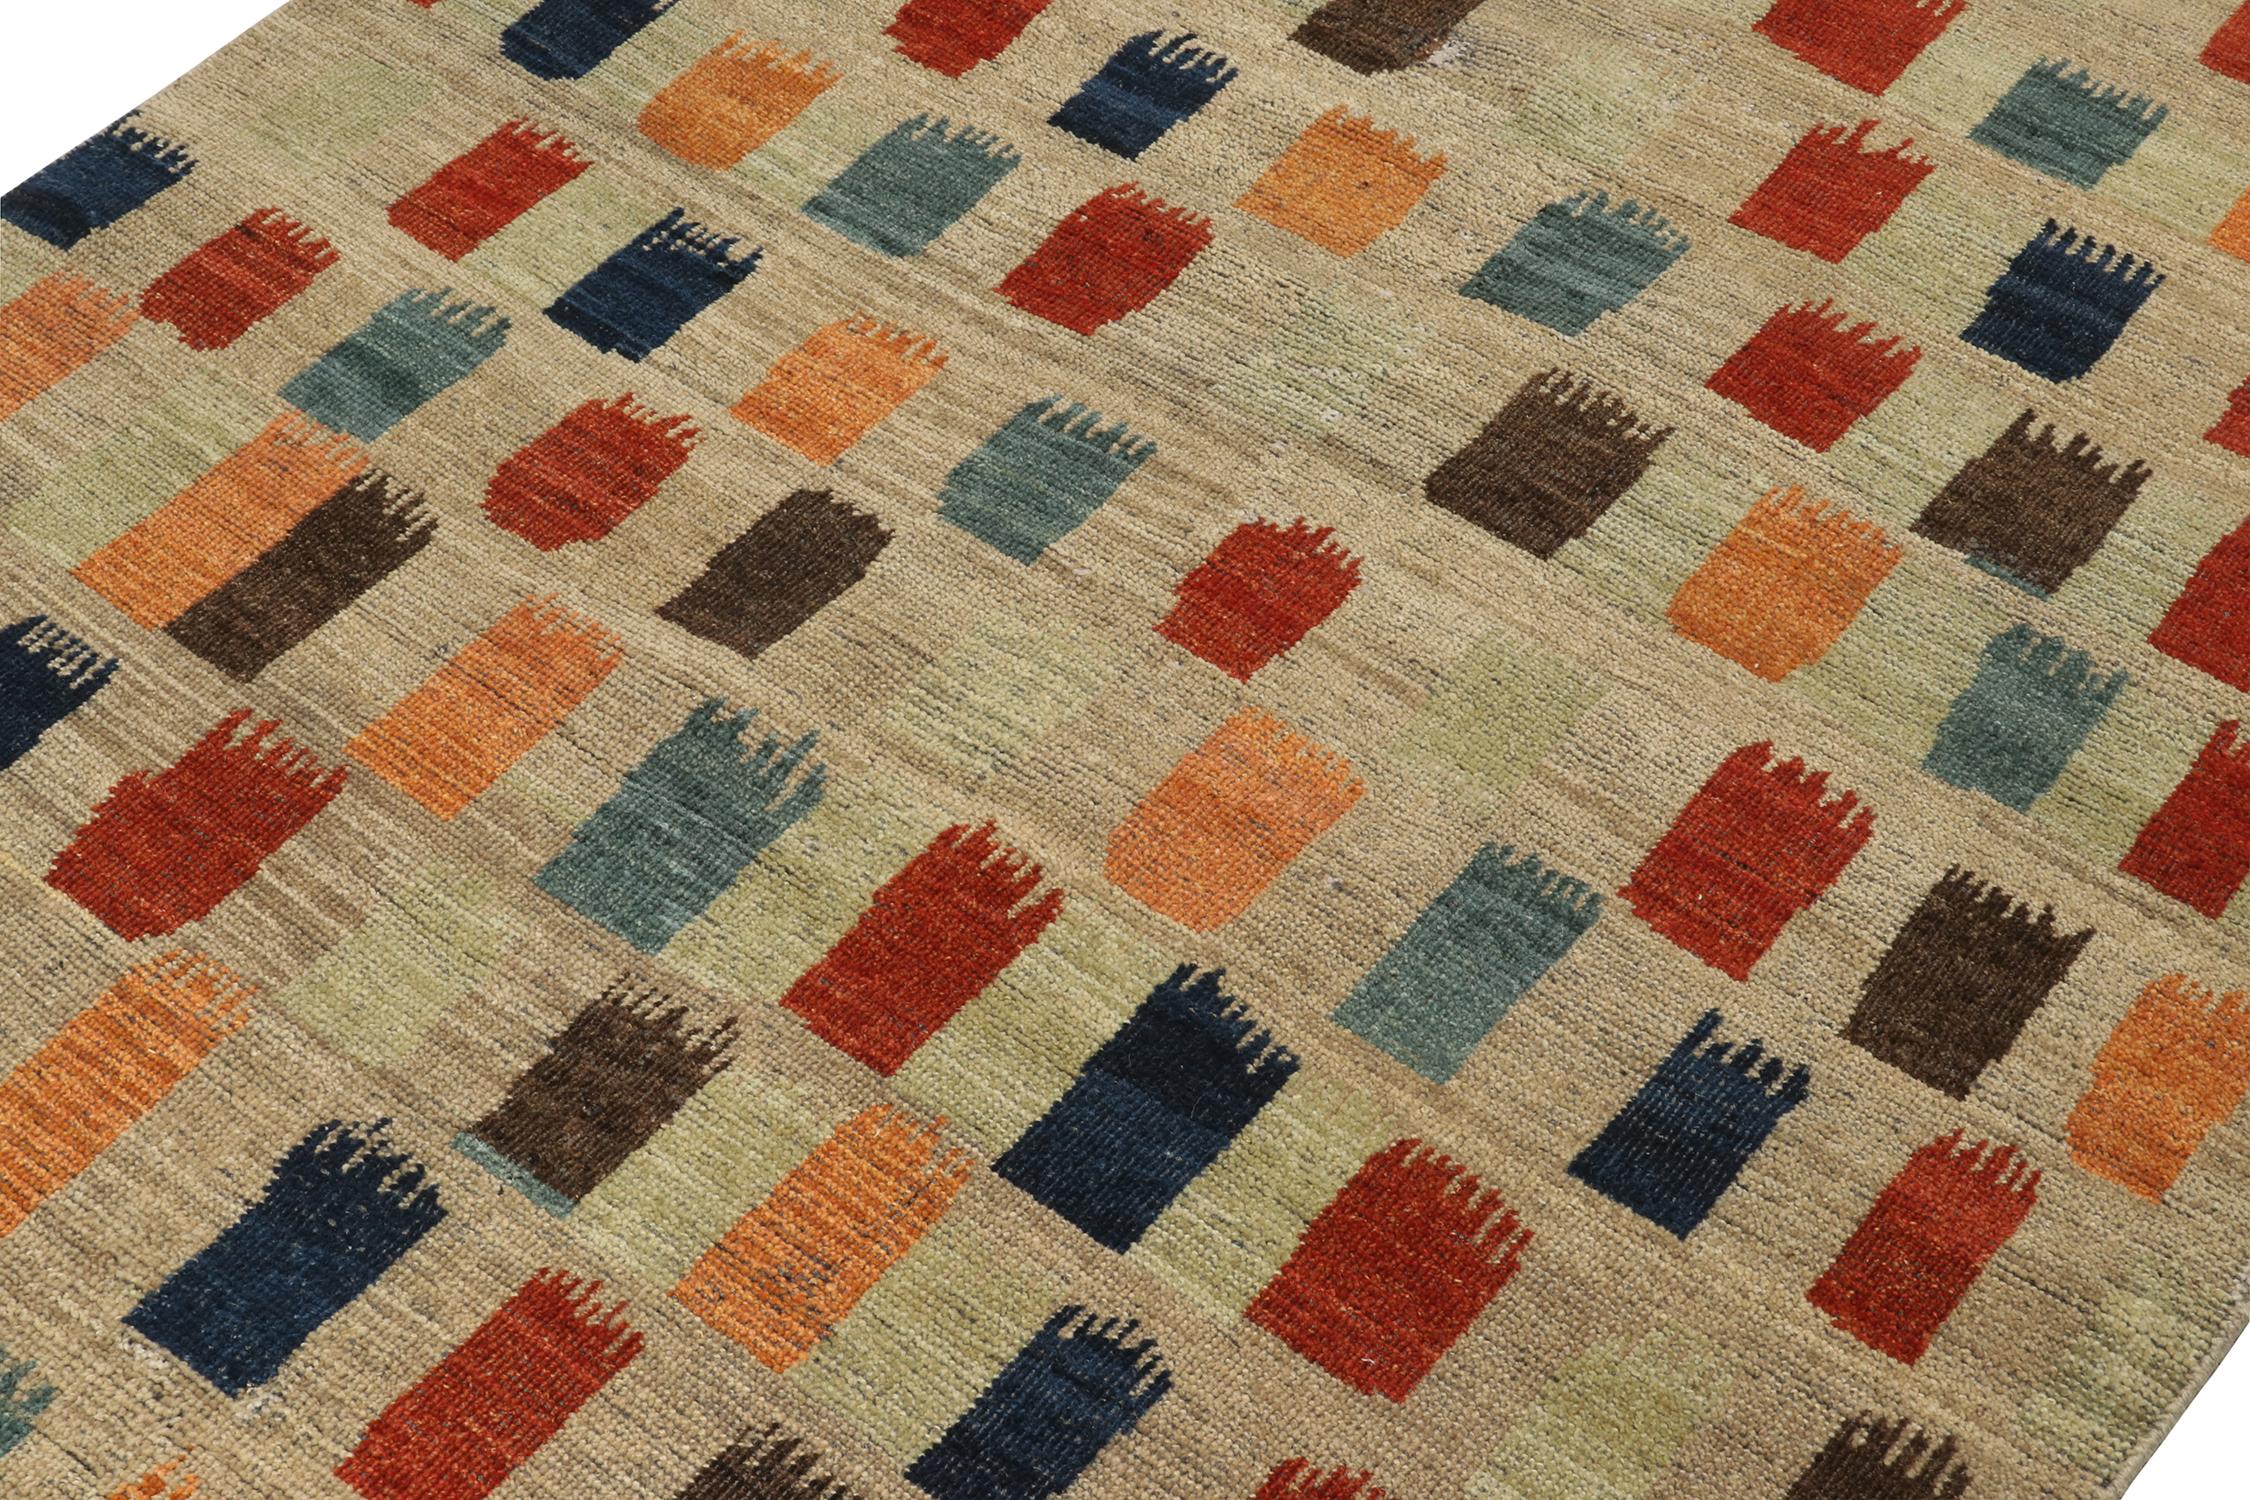 Indian Rug & Kilim’s Tribal Style Rug in Beige-Brown with Vibrant Geometric Pattern For Sale